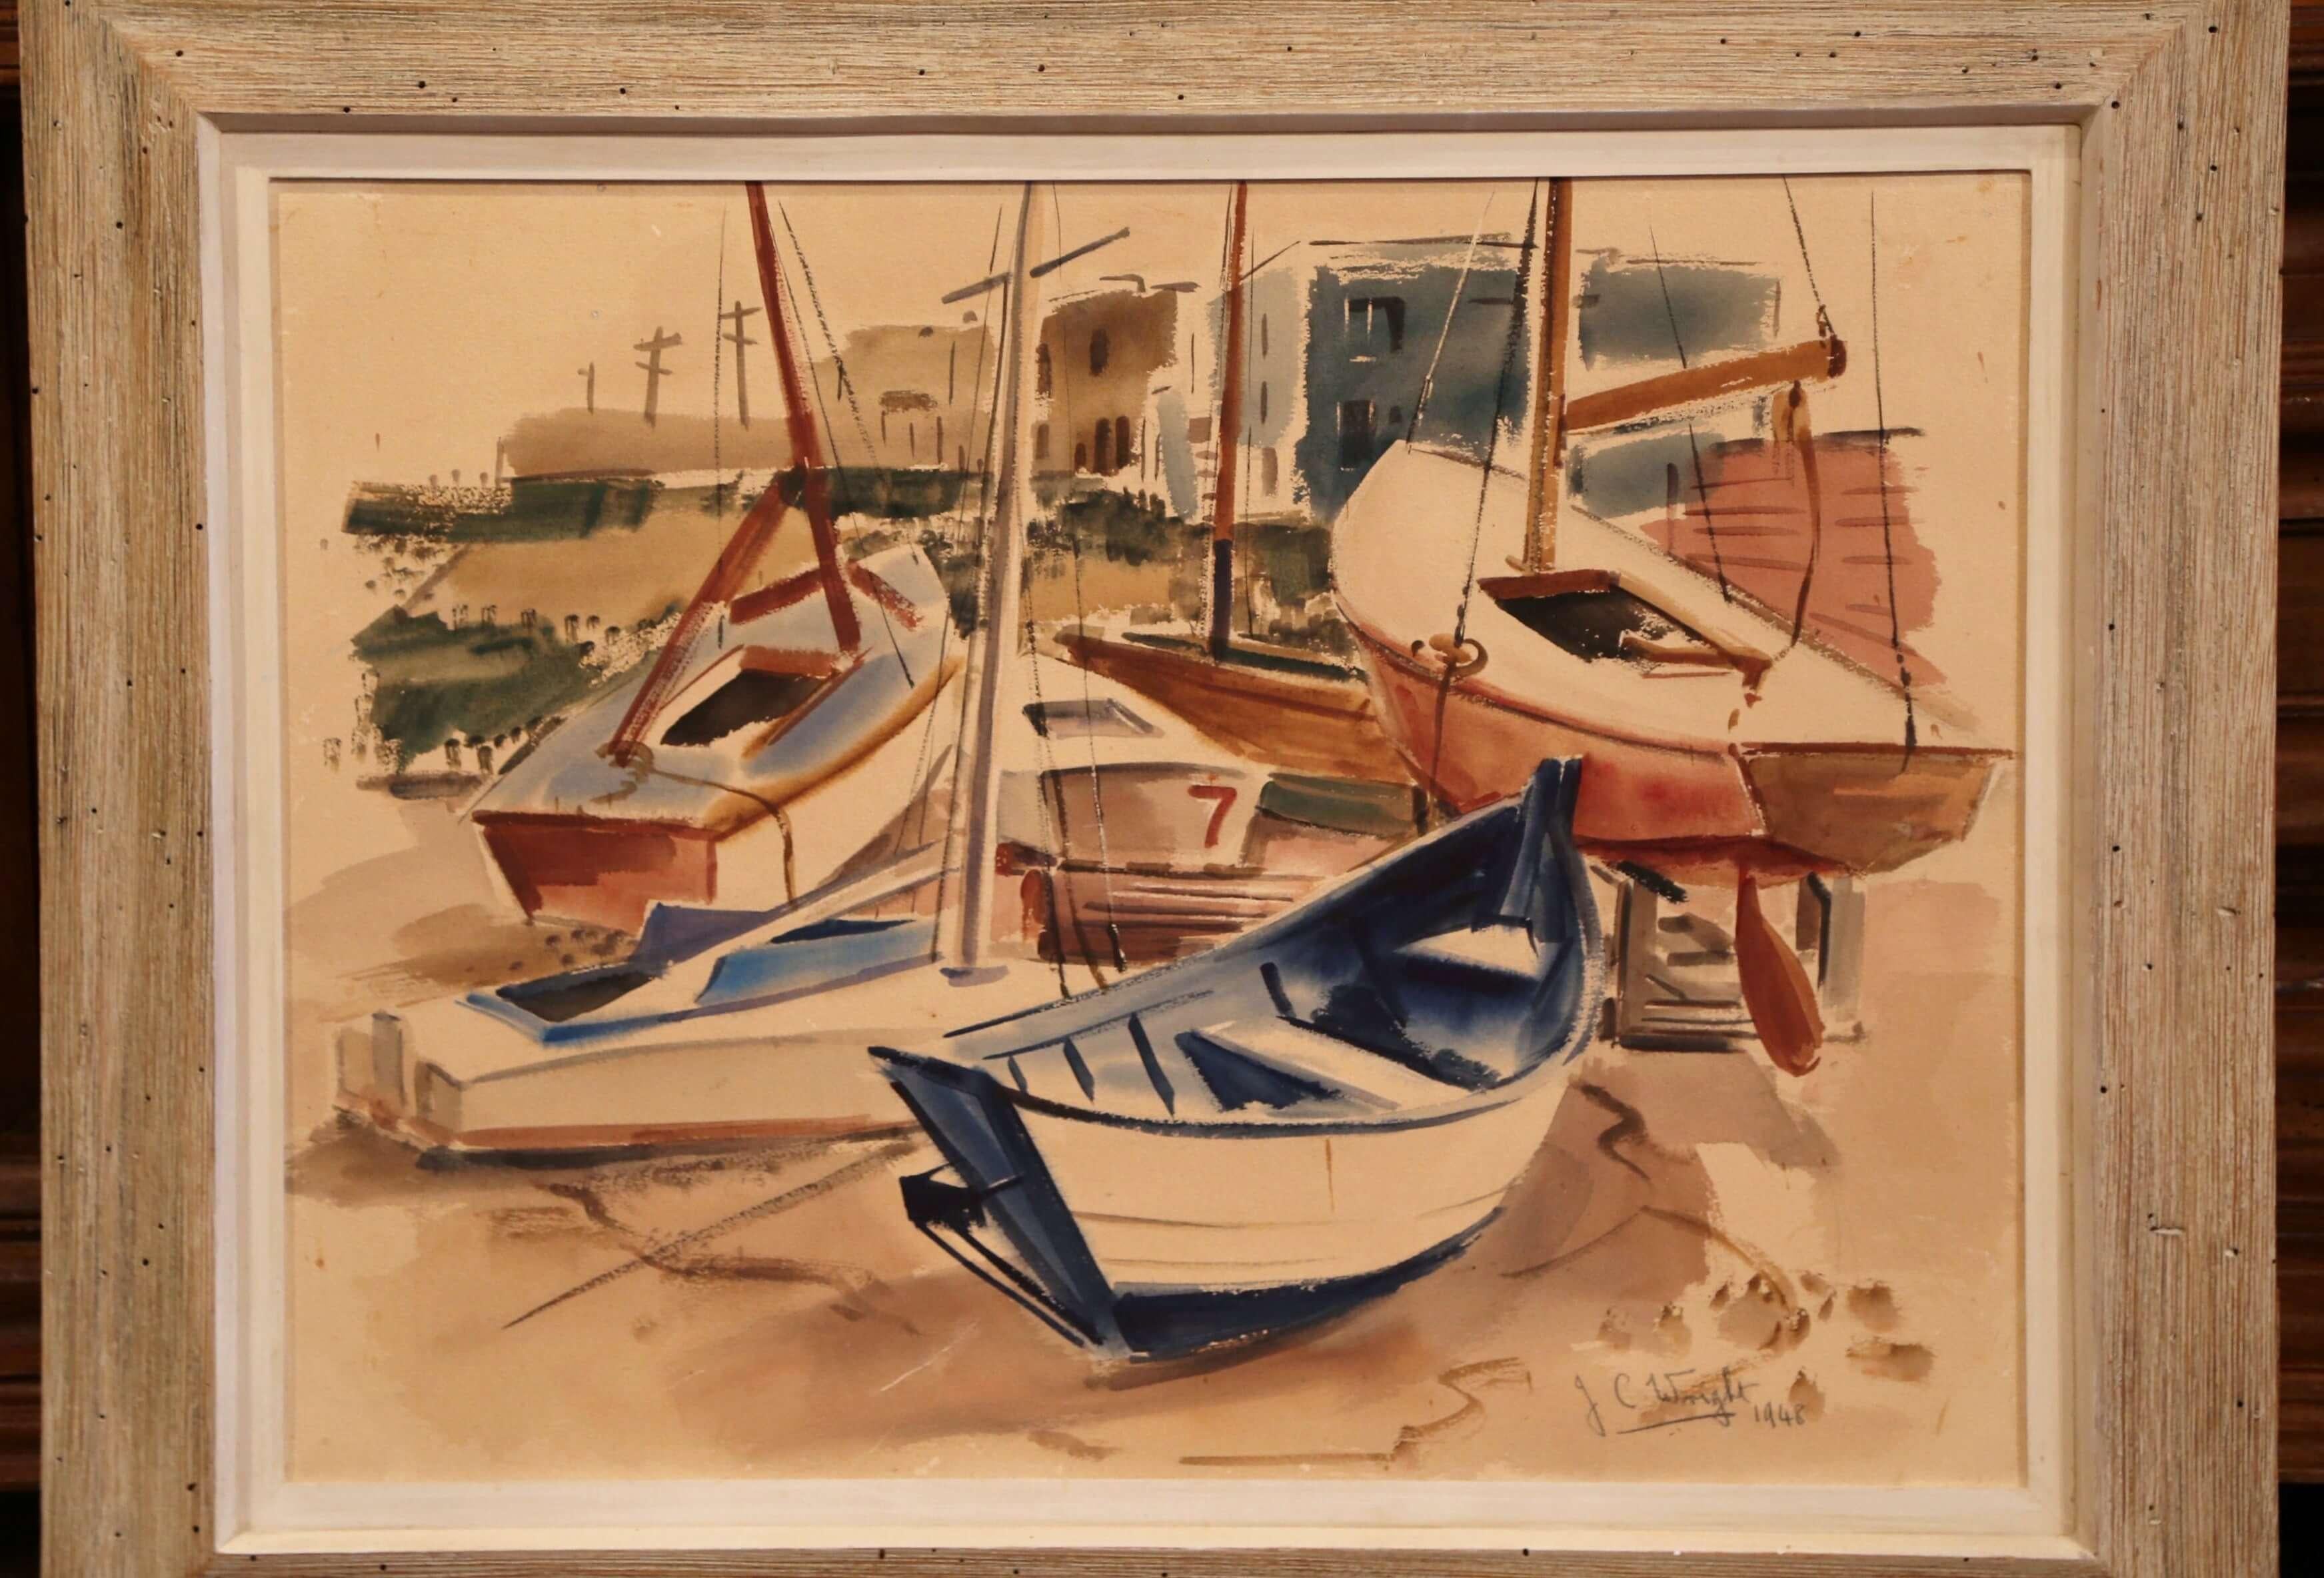 This mid-20th century painting was found in southern France; set in the original wooden frame with white wash finish, the colorful painting features sailboats in harbour with housing in the background. The work of art is signed by the artist J.C.